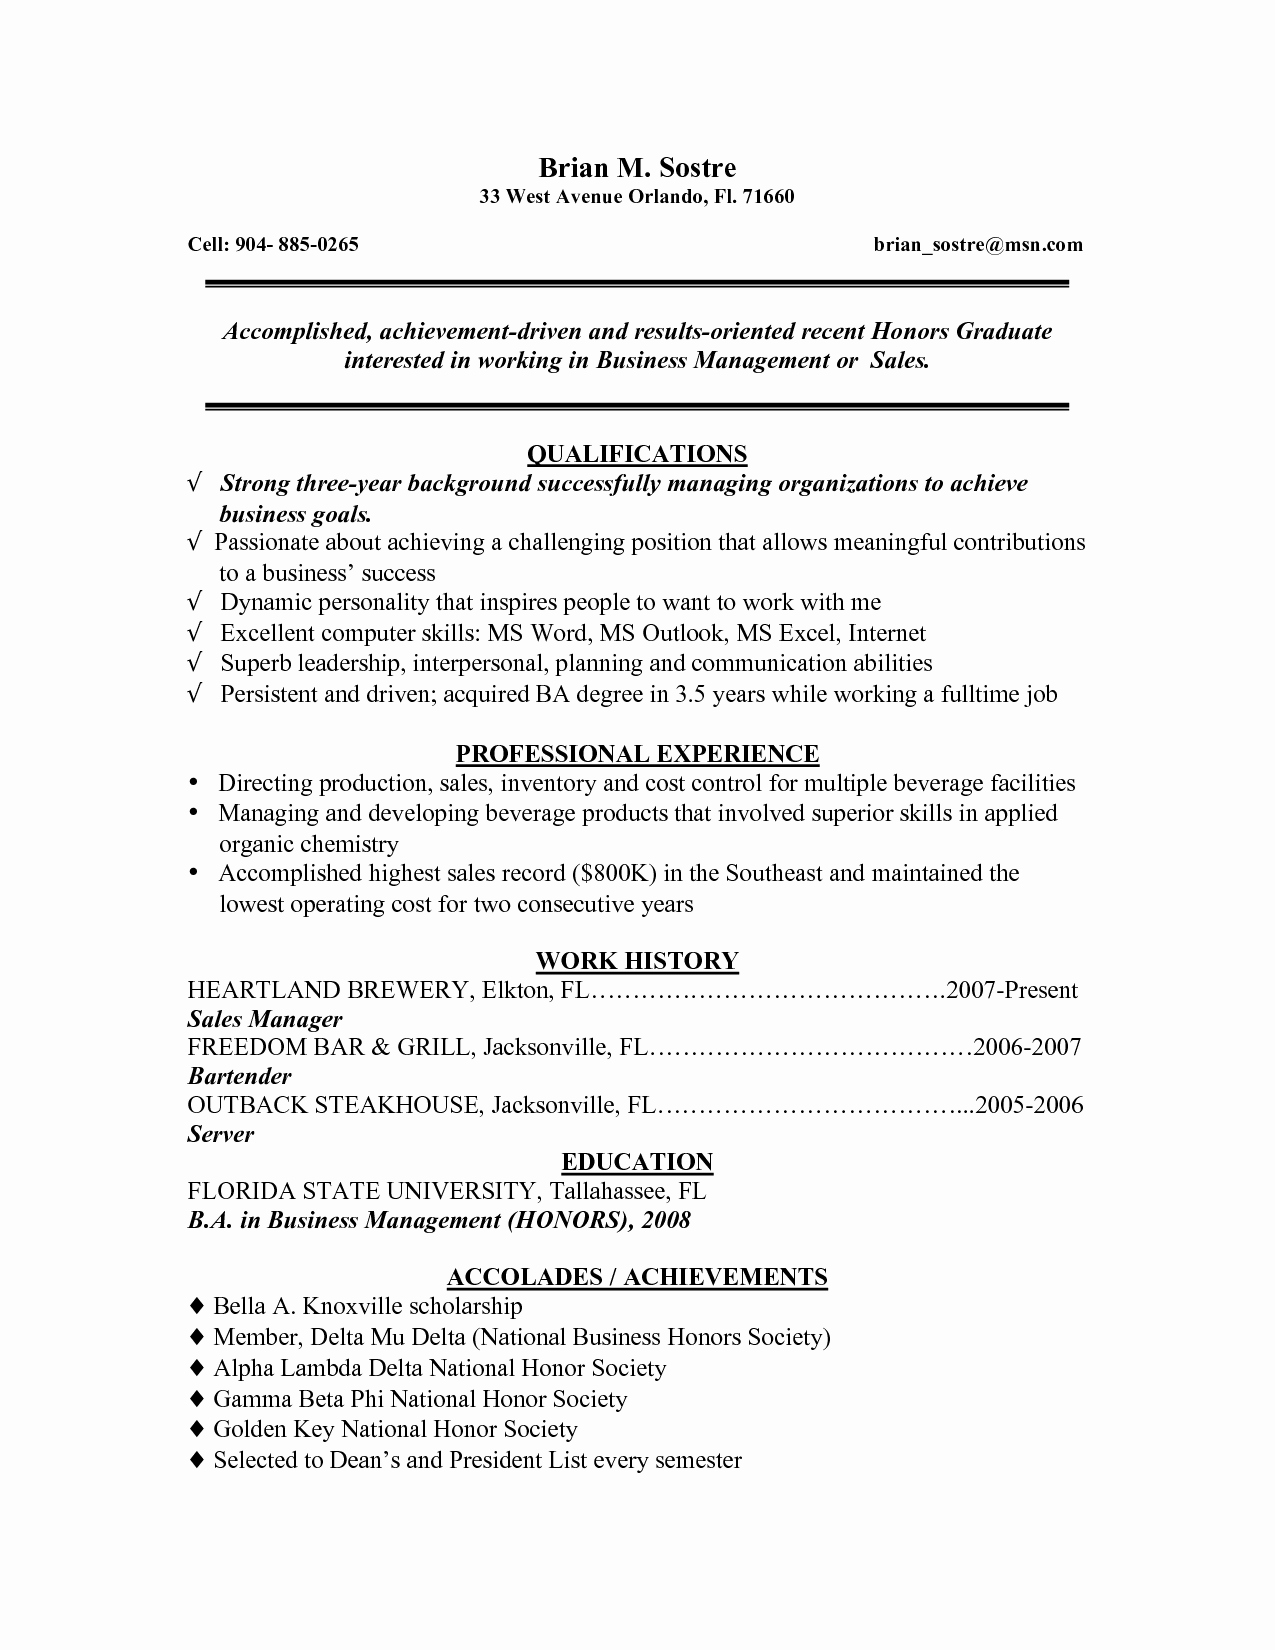 Recent College Graduate Resume Template Lovely Best Resume for Recent College Graduate Resume Ideas